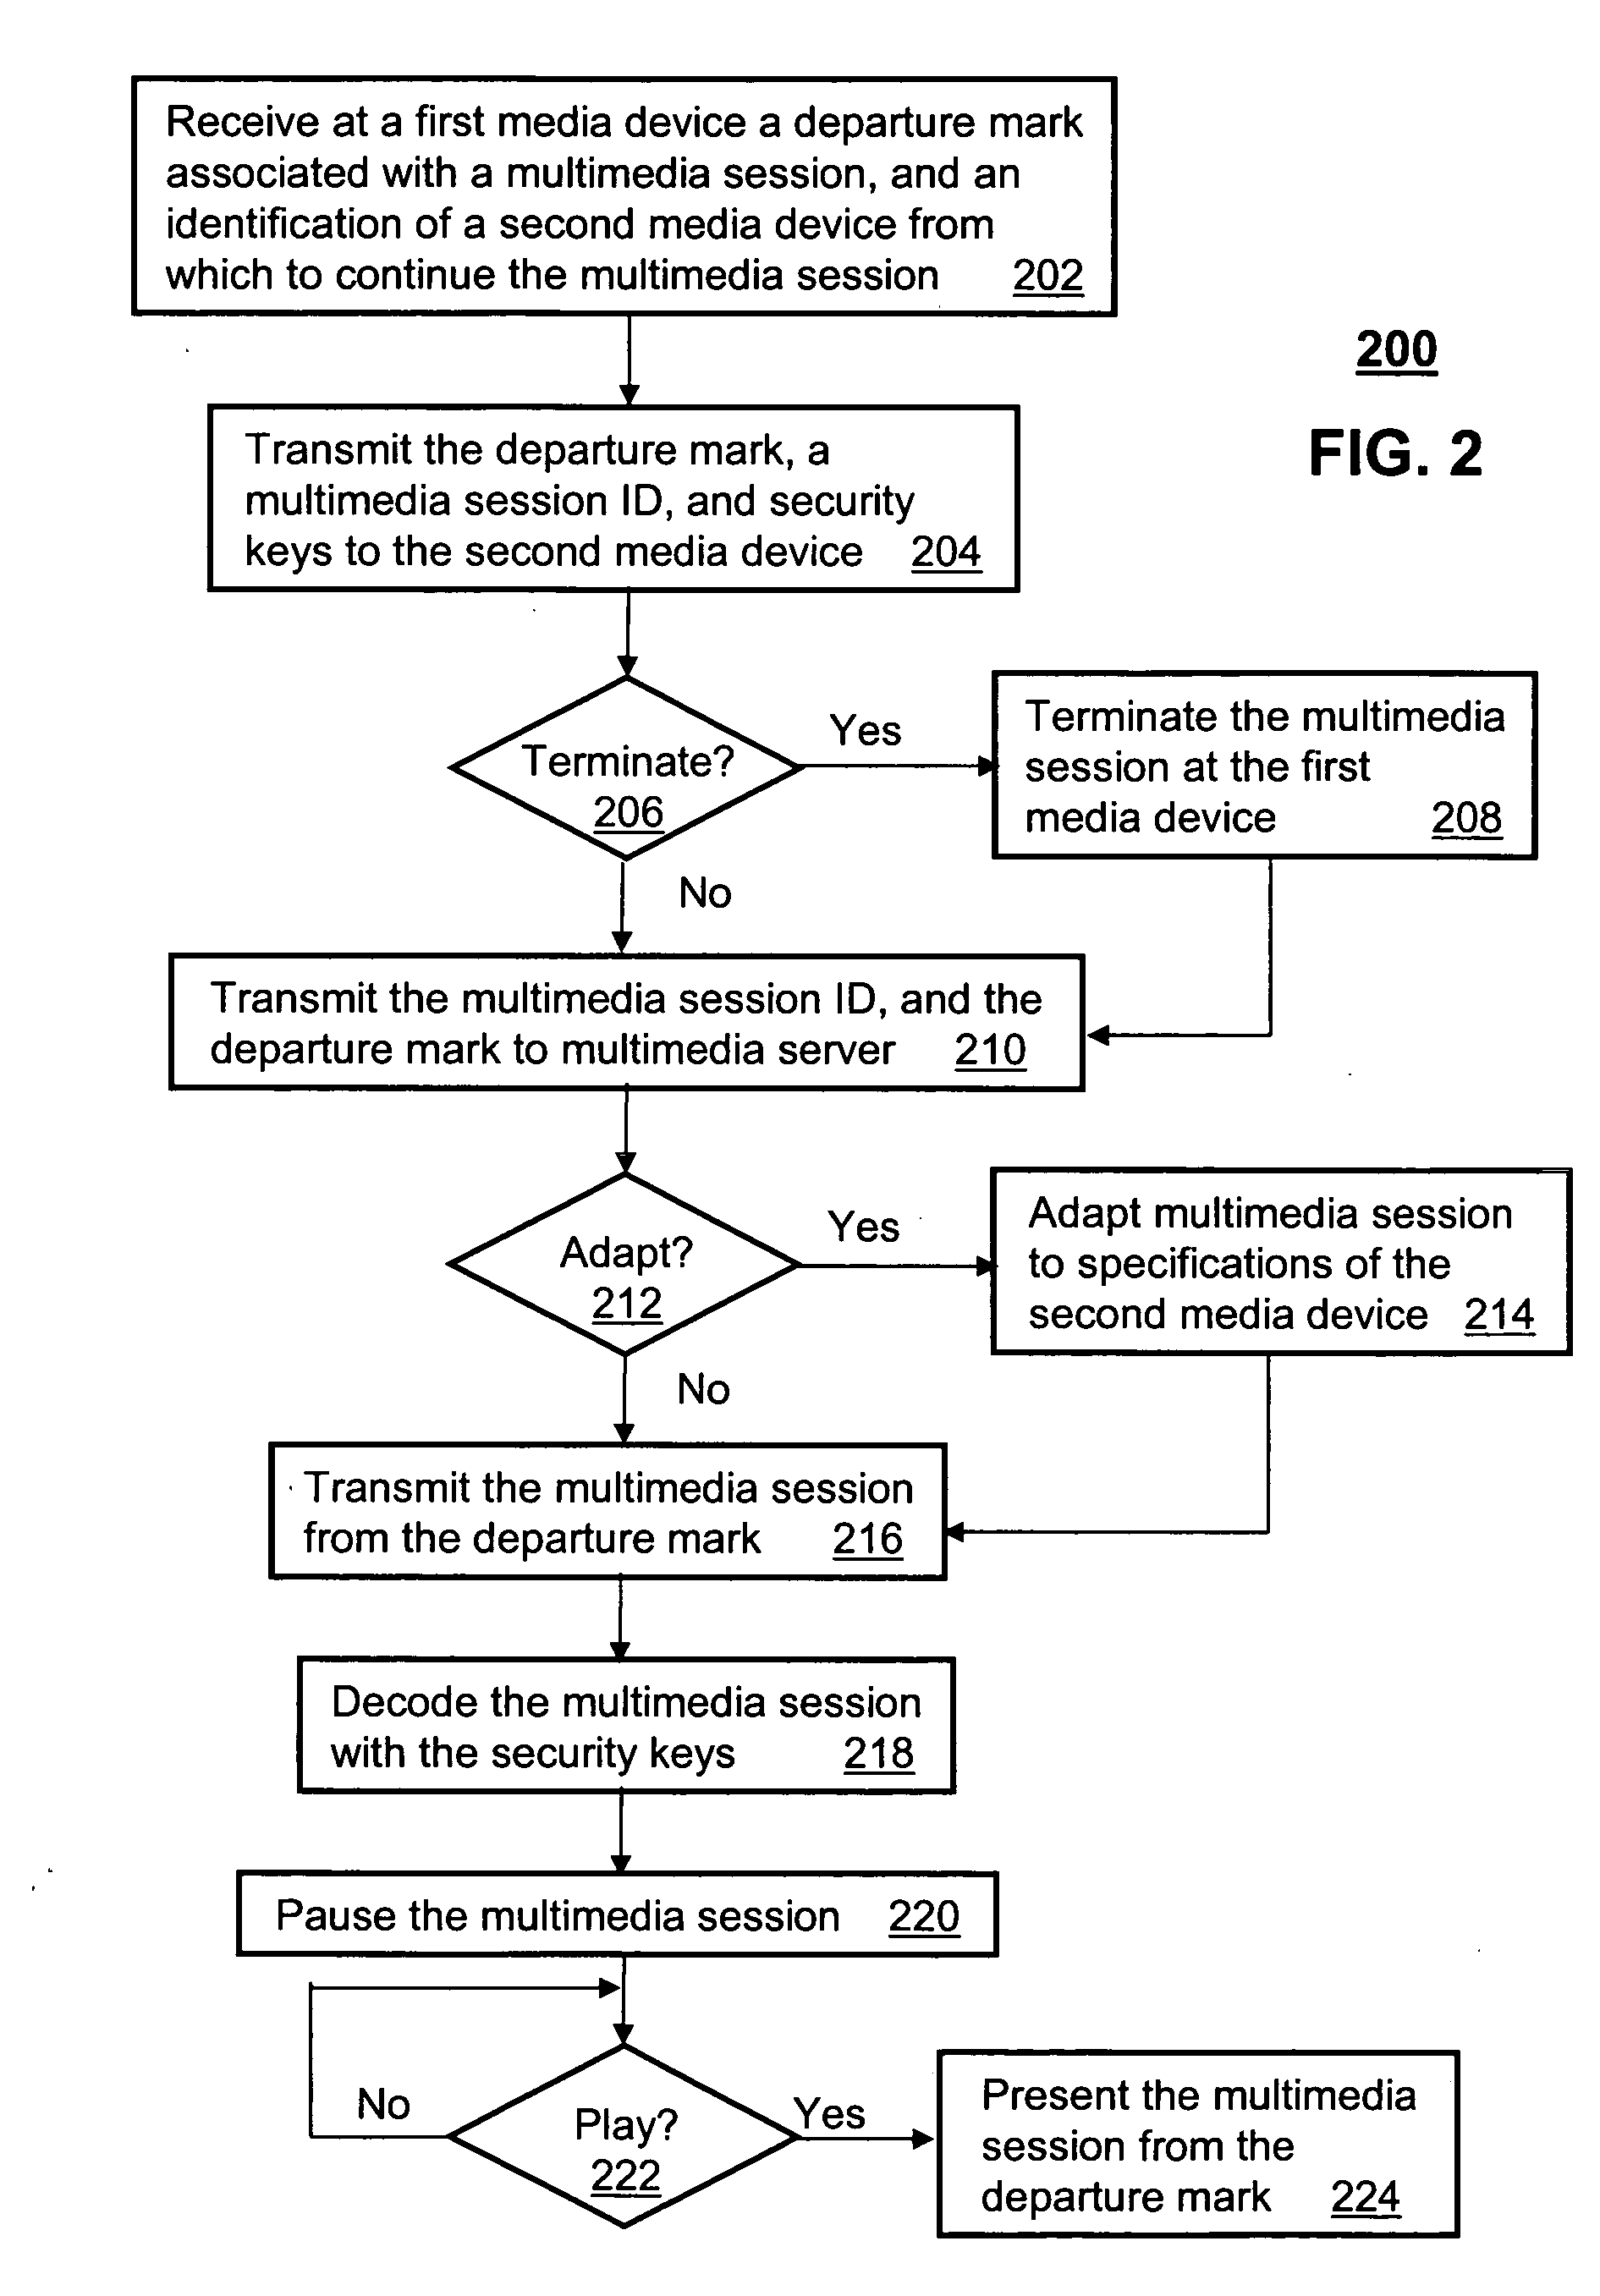 Method for maintaining continuity of a multimedia session between media devices